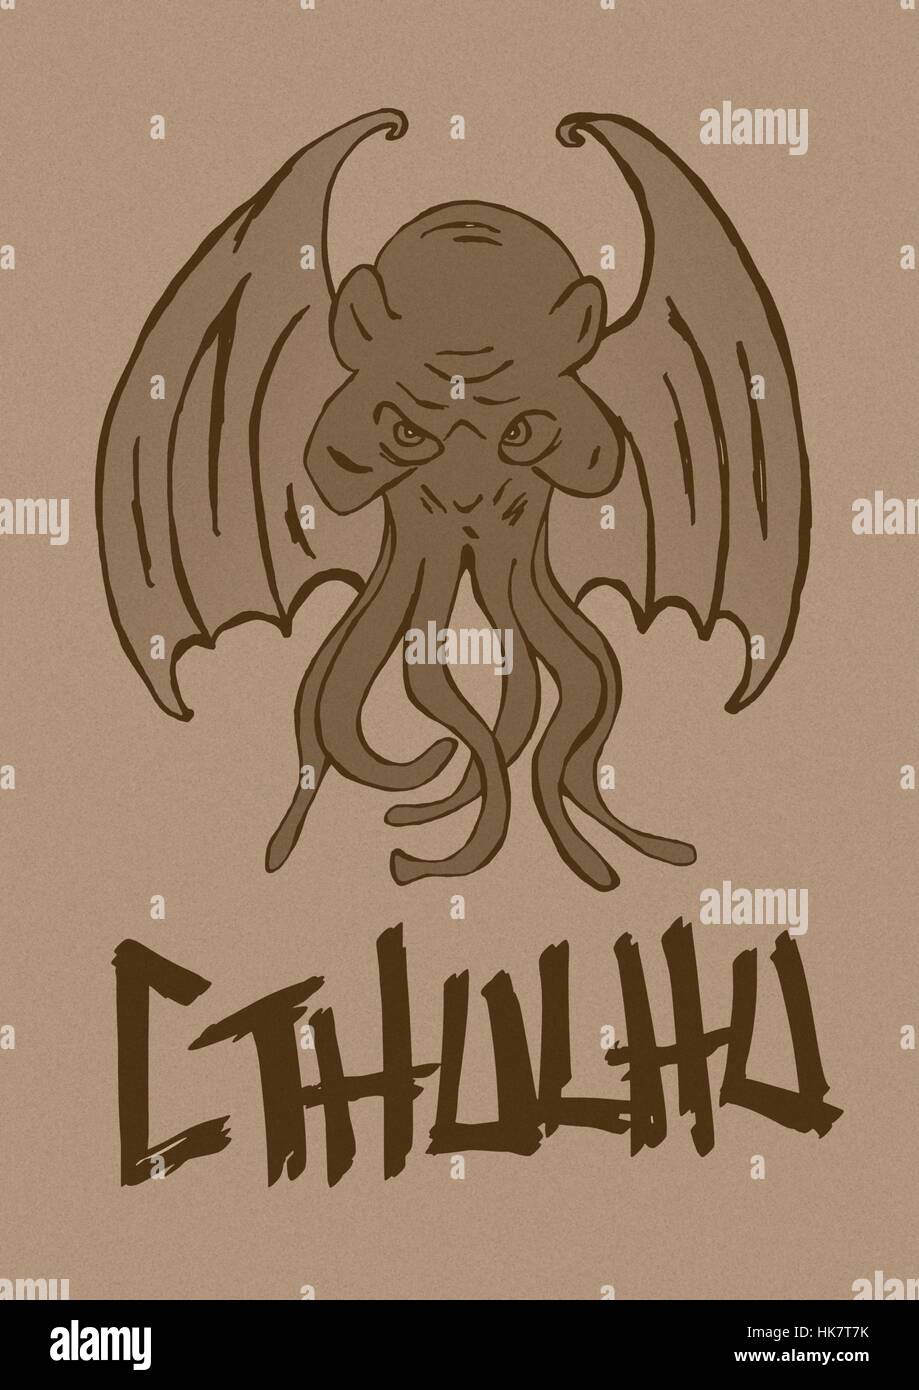 Cthulhu monster vintage Stock Photo